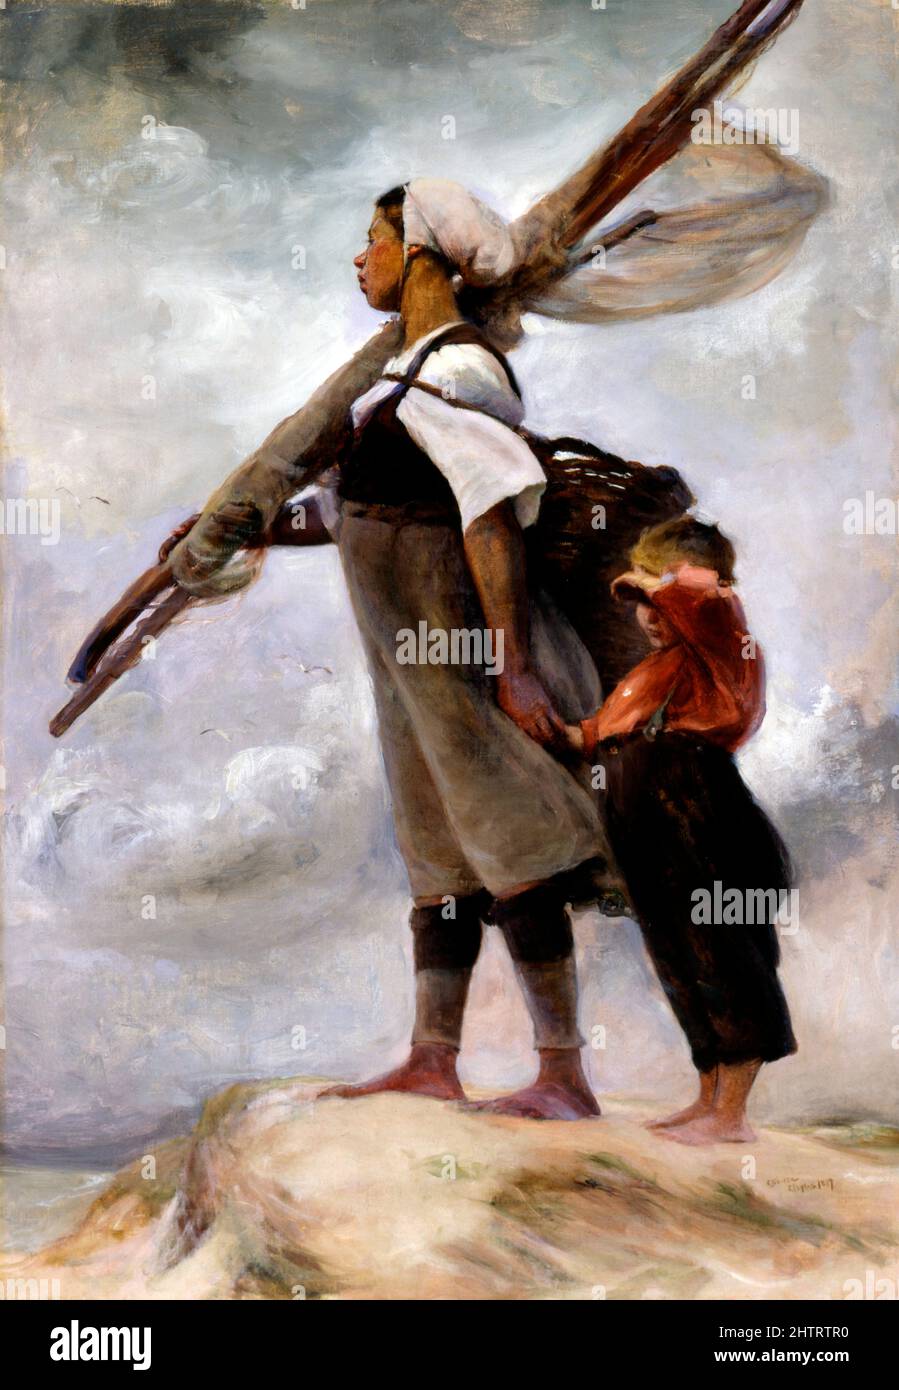 Fisher Girl of Picardy by the American artist, Elizabeth Nourse (1859-1938), oil on canvas, 1889 Stock Photo